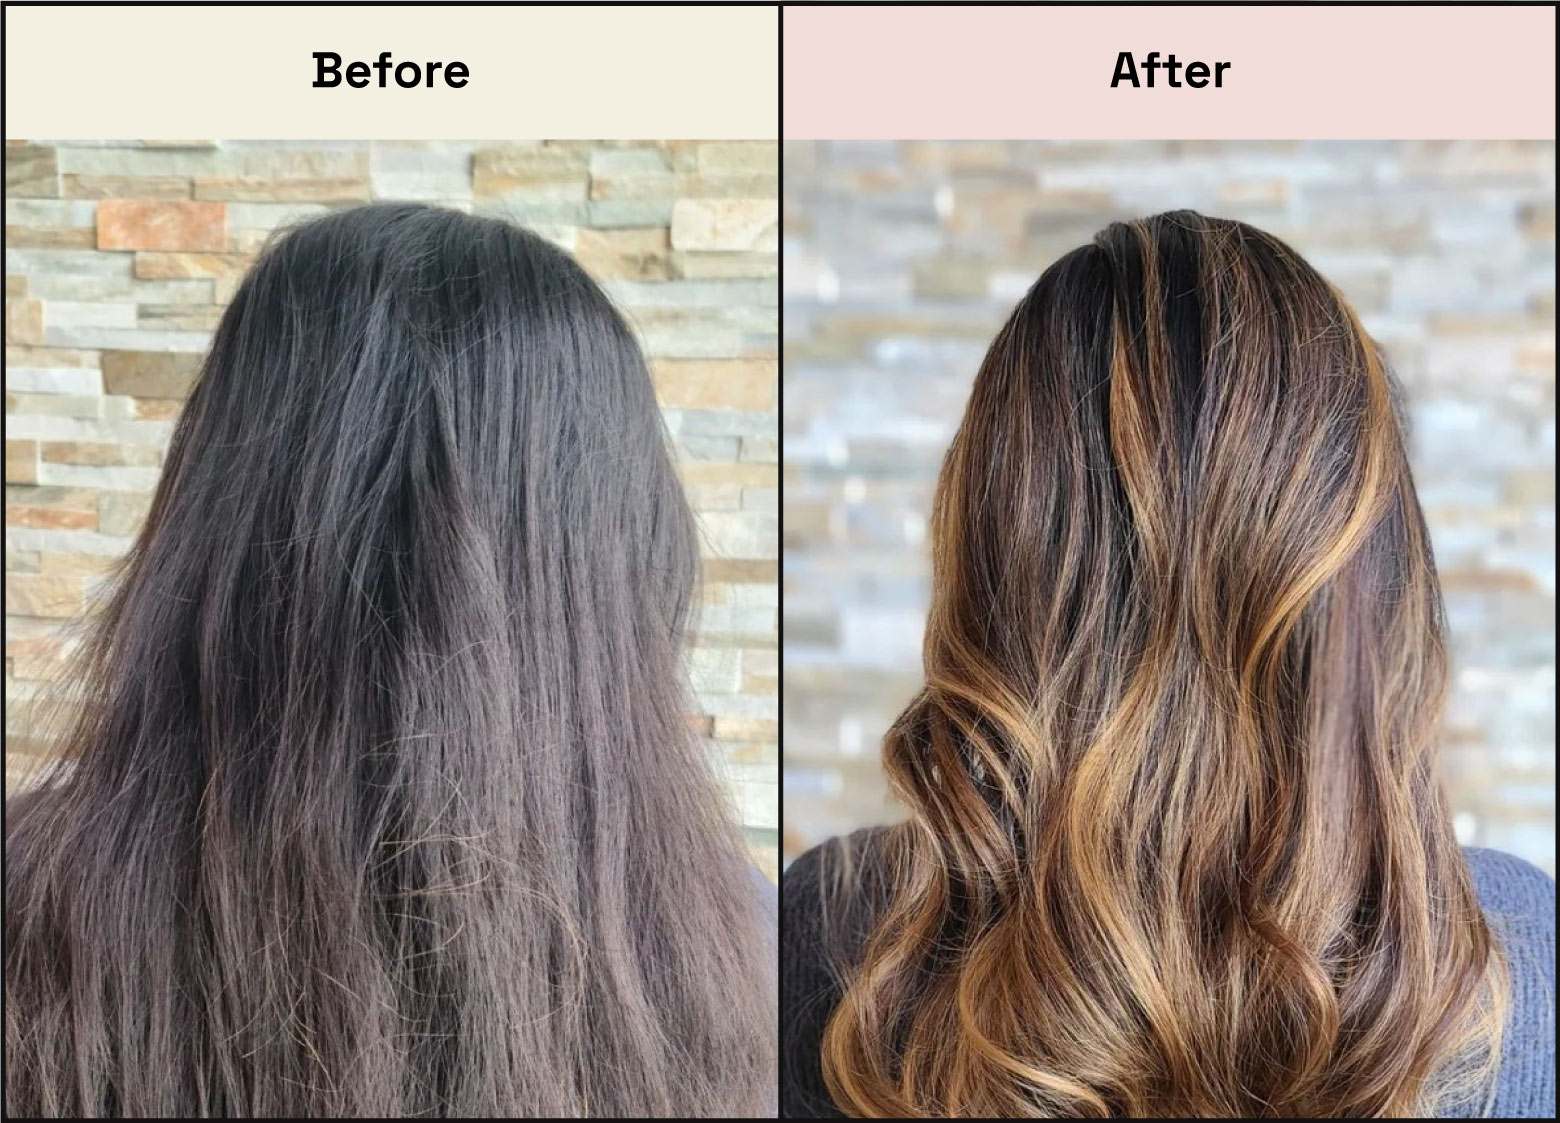 A woman’s hair before and after a keratin treatment. After the treatment, the hair is smoother and brighter.